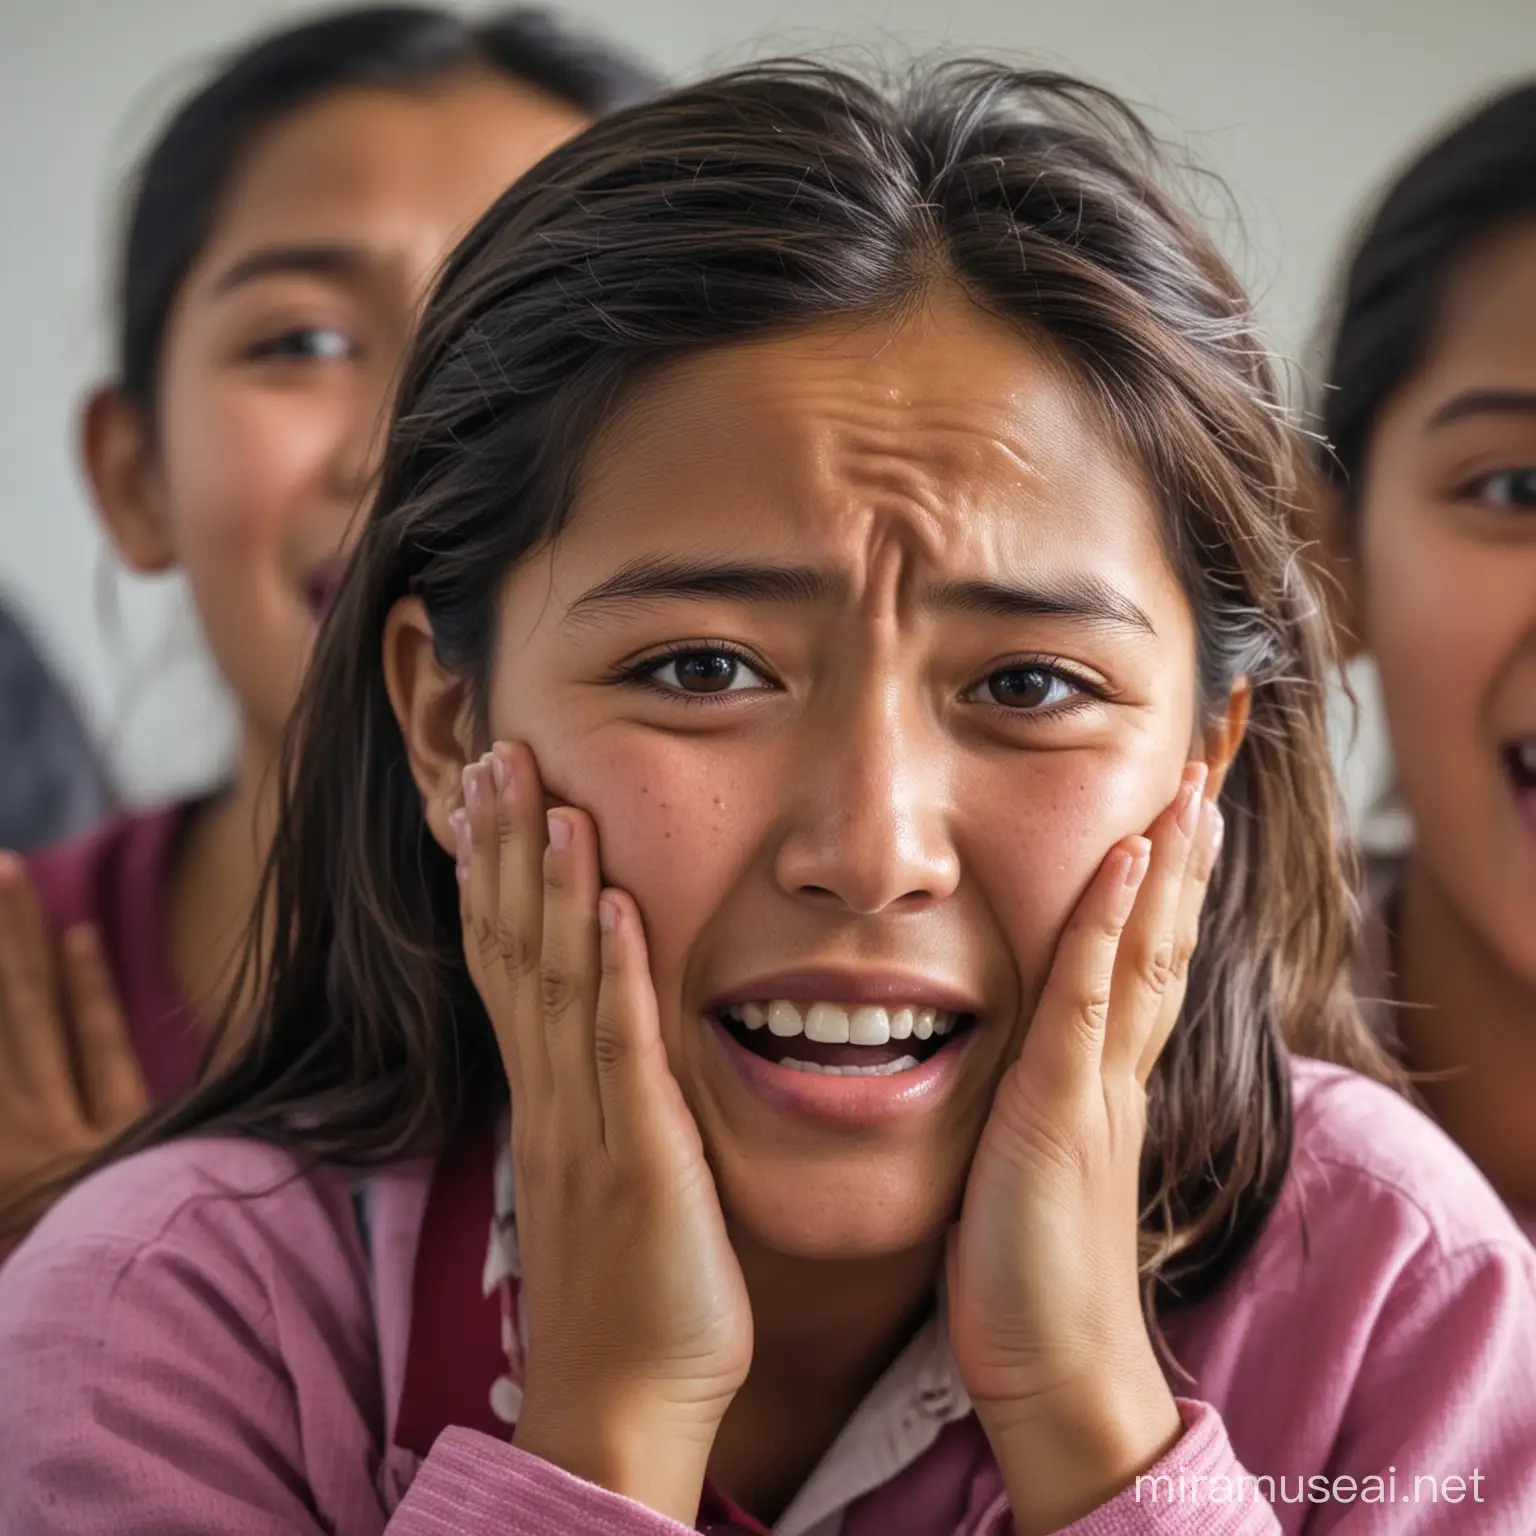 A nepali girl crying in school due to dental pain